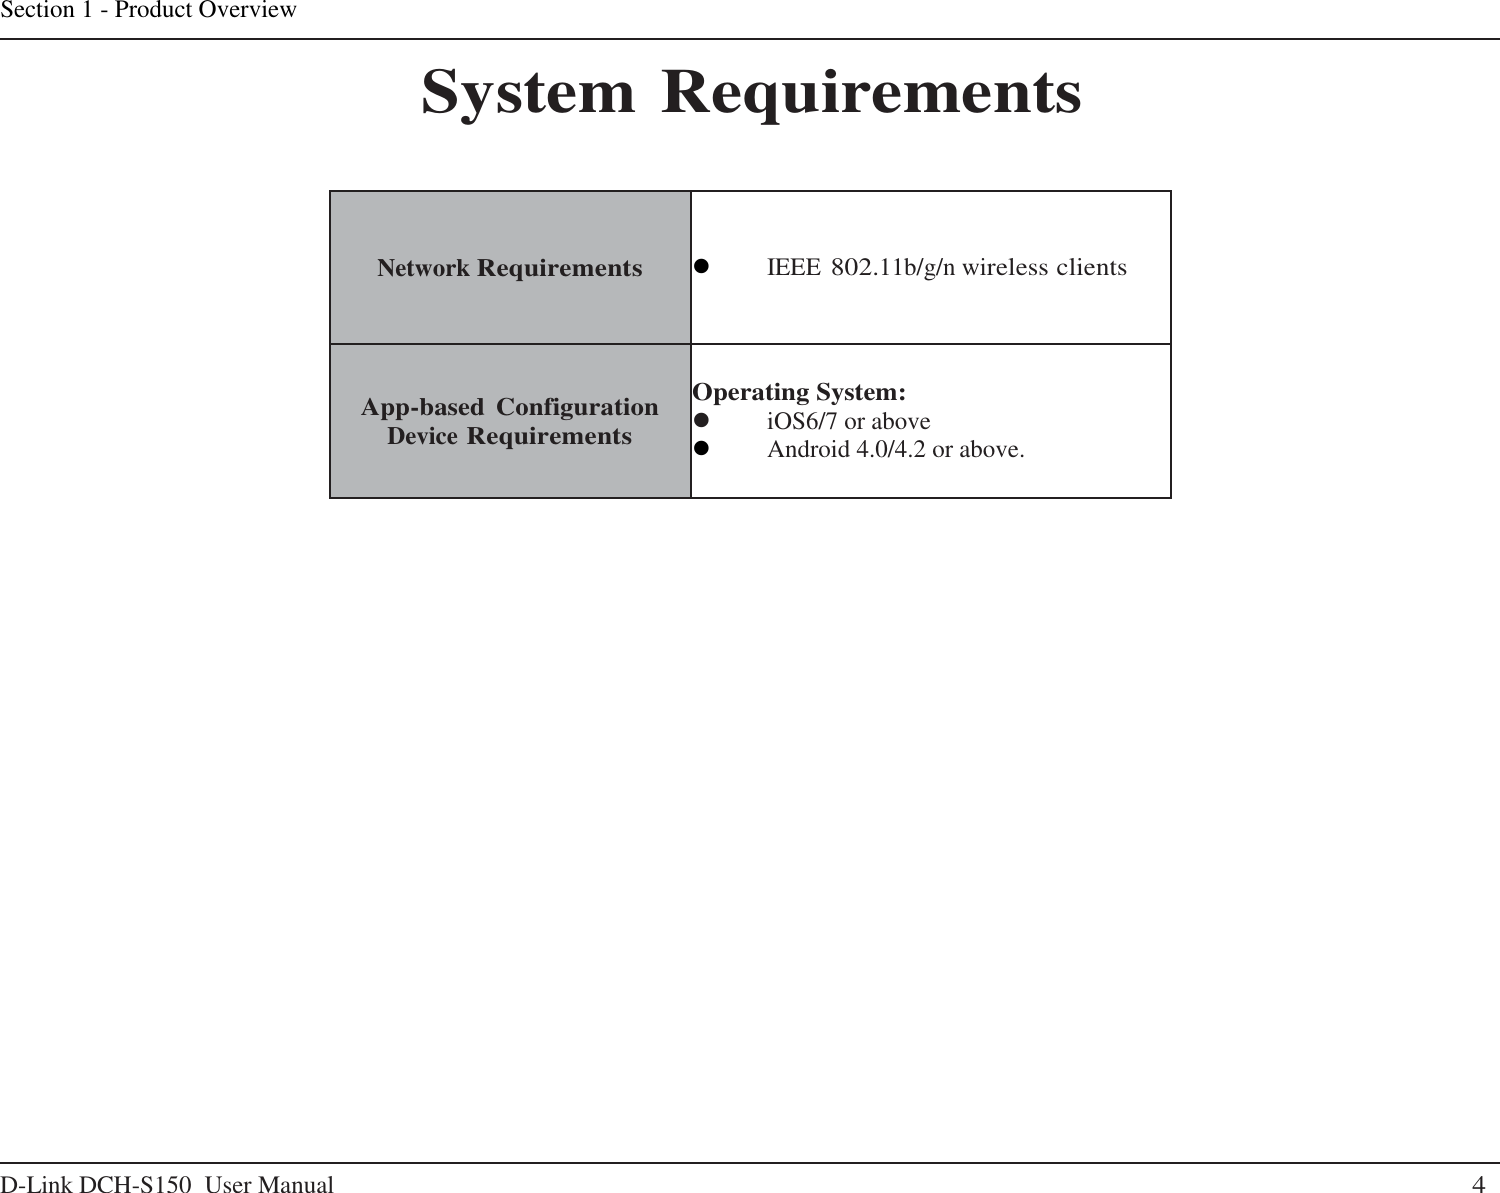 D-Link DCH-S150  User Manual 4 Section 1 - Product Overview     System Requirements    Network Requirements  IEEE 802.11b/g/n wireless clients App-based Configuration Device Requirements Operating System:  iOS6/7 or above  Android 4.0/4.2 or above. 